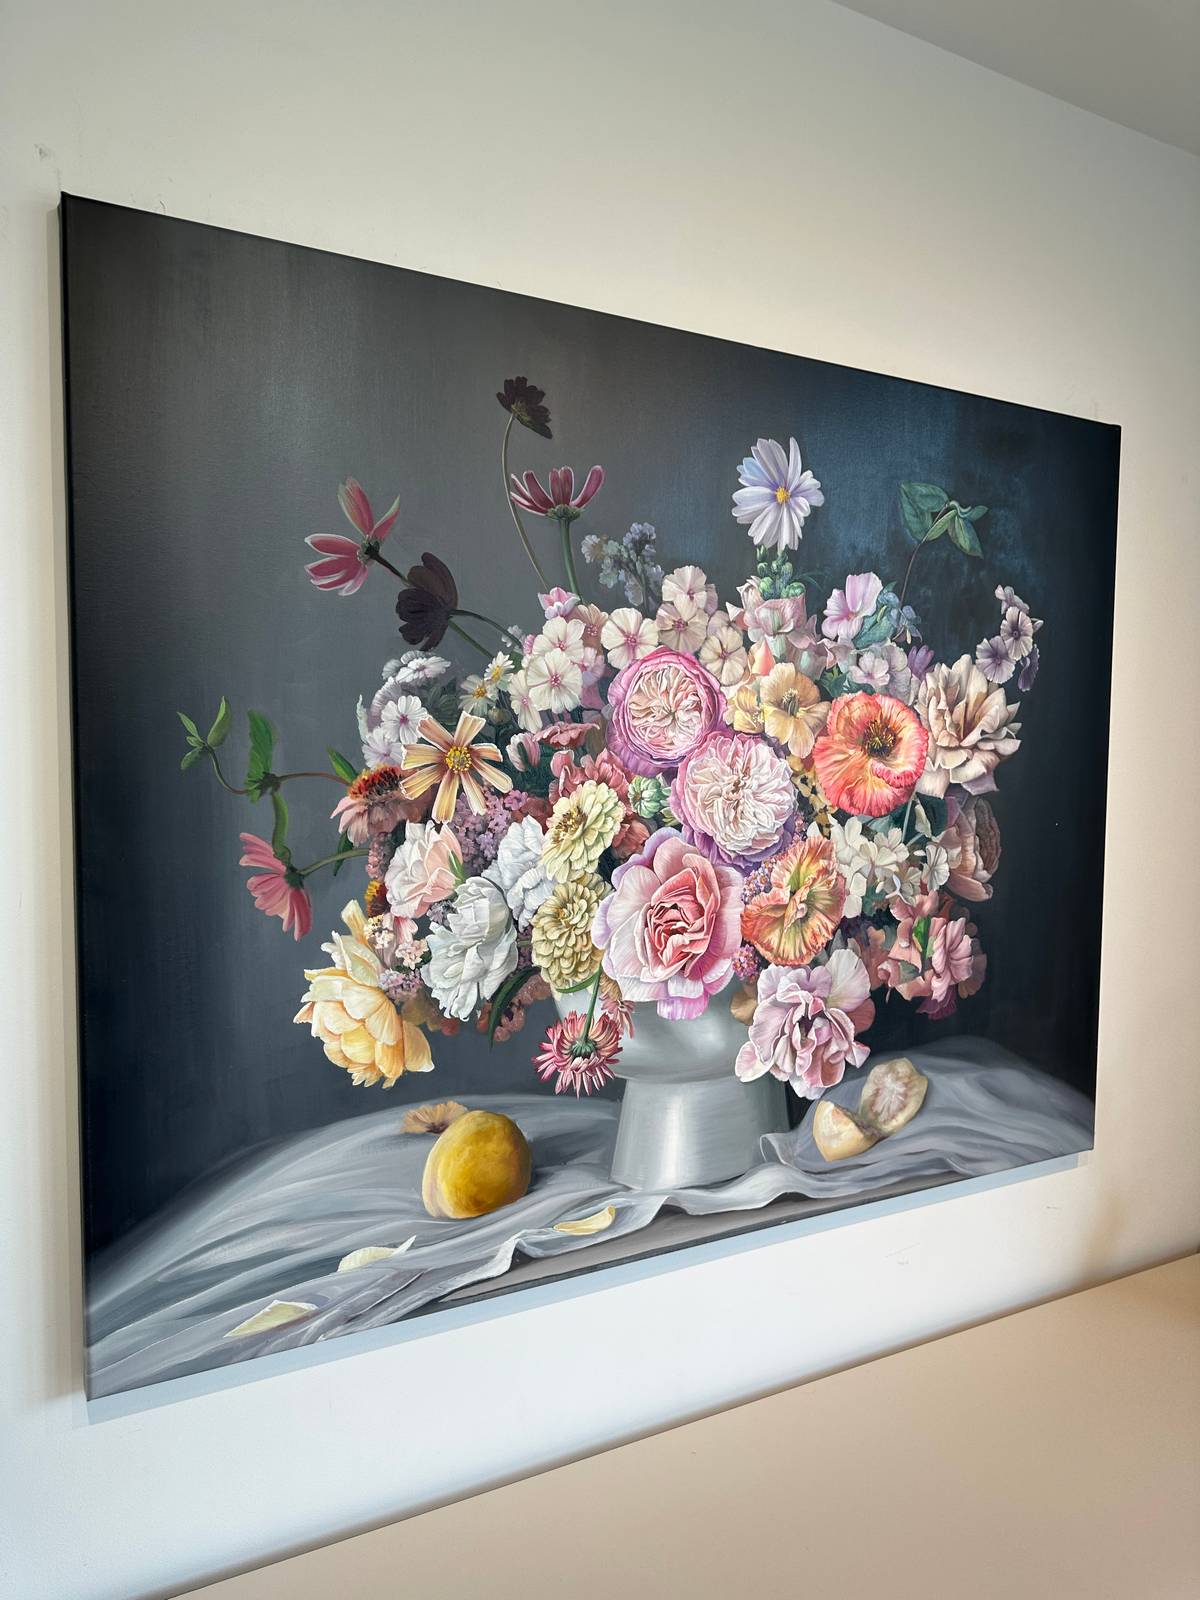 NewingerART: "My Heart Quivers Each Time Your Name Falls On It" - 100 x 130cm (Katharina Husslein)